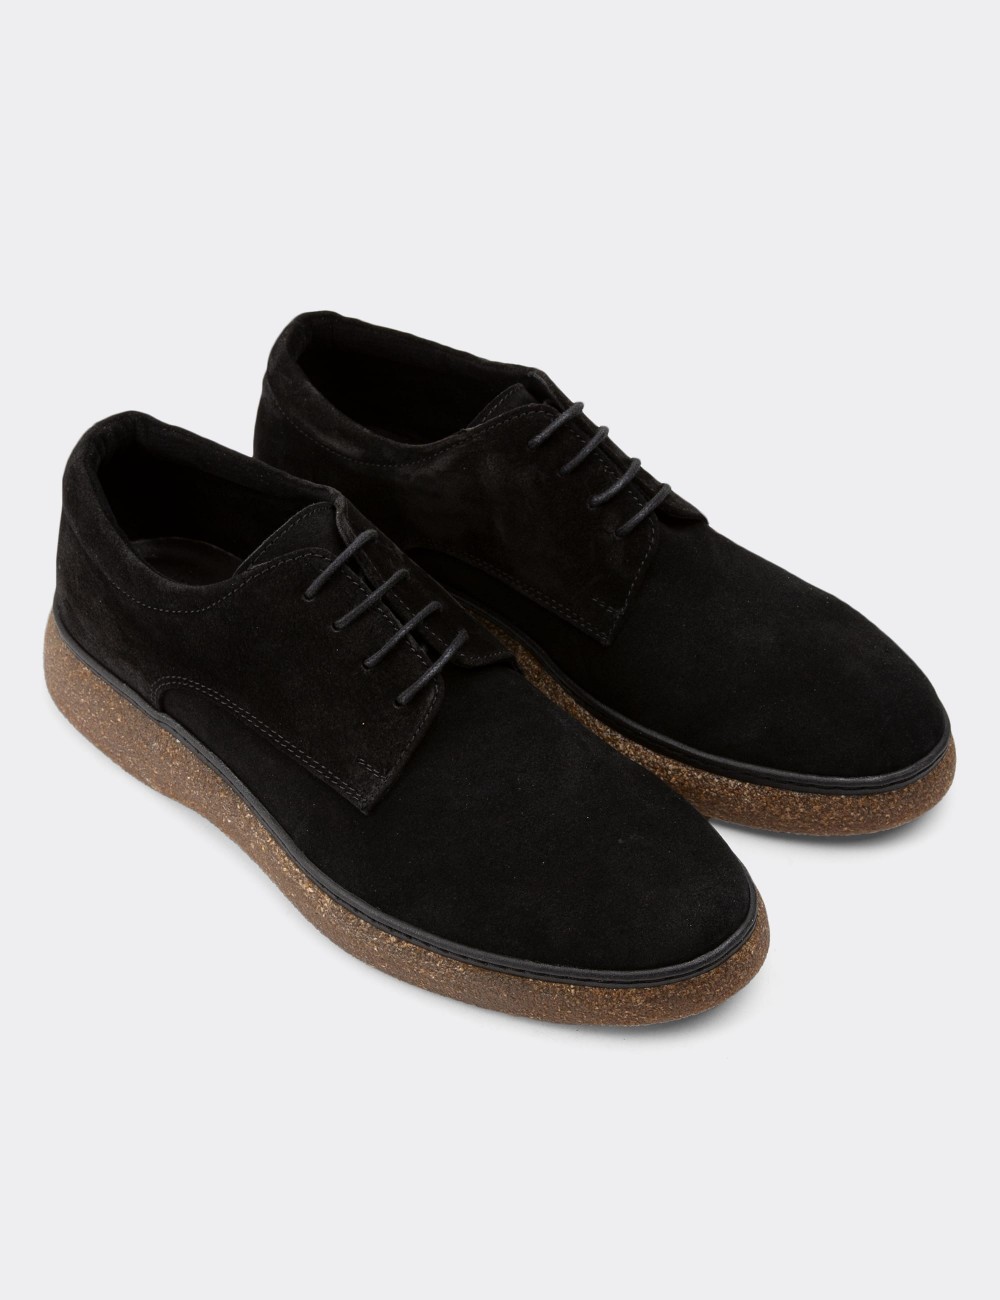 Black Suede Leather Lace-up Shoes - 01934MSYHC01